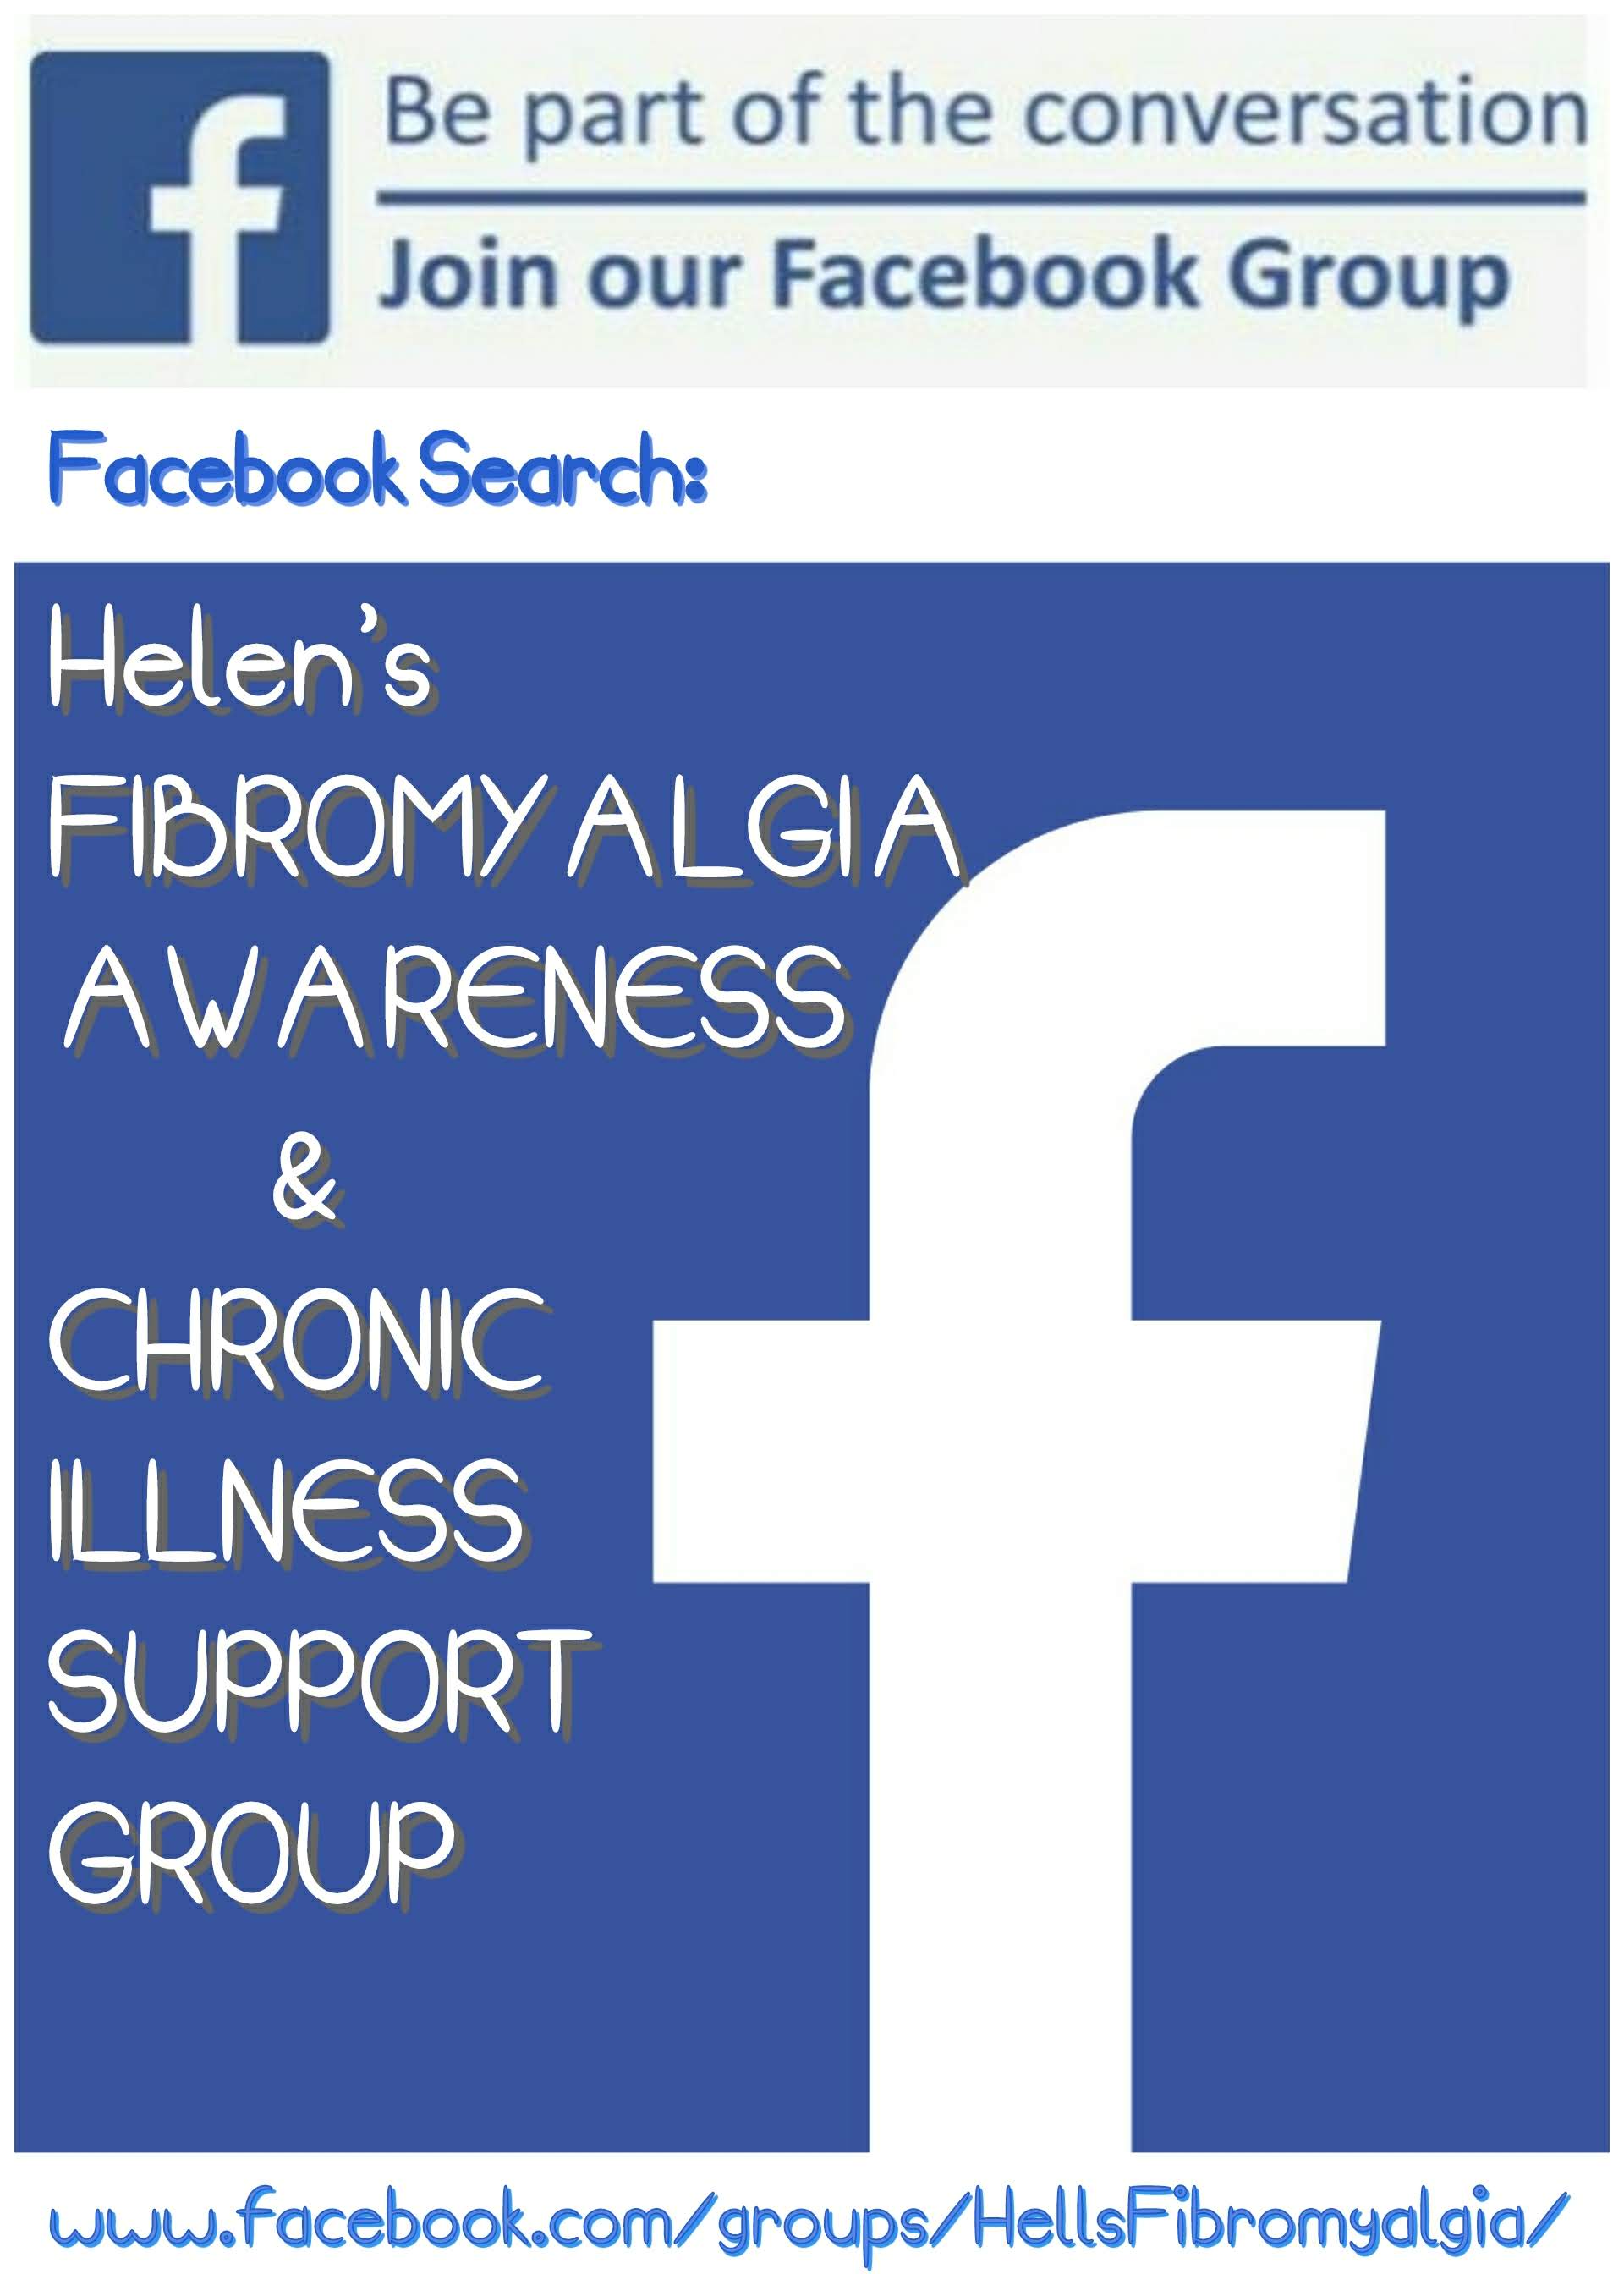 Join in the conversation in our facebook group. search - HELEN'S FIBROMYALGIA AWARENESS & CHRONIC ILLNESS SUPPORT GROUP